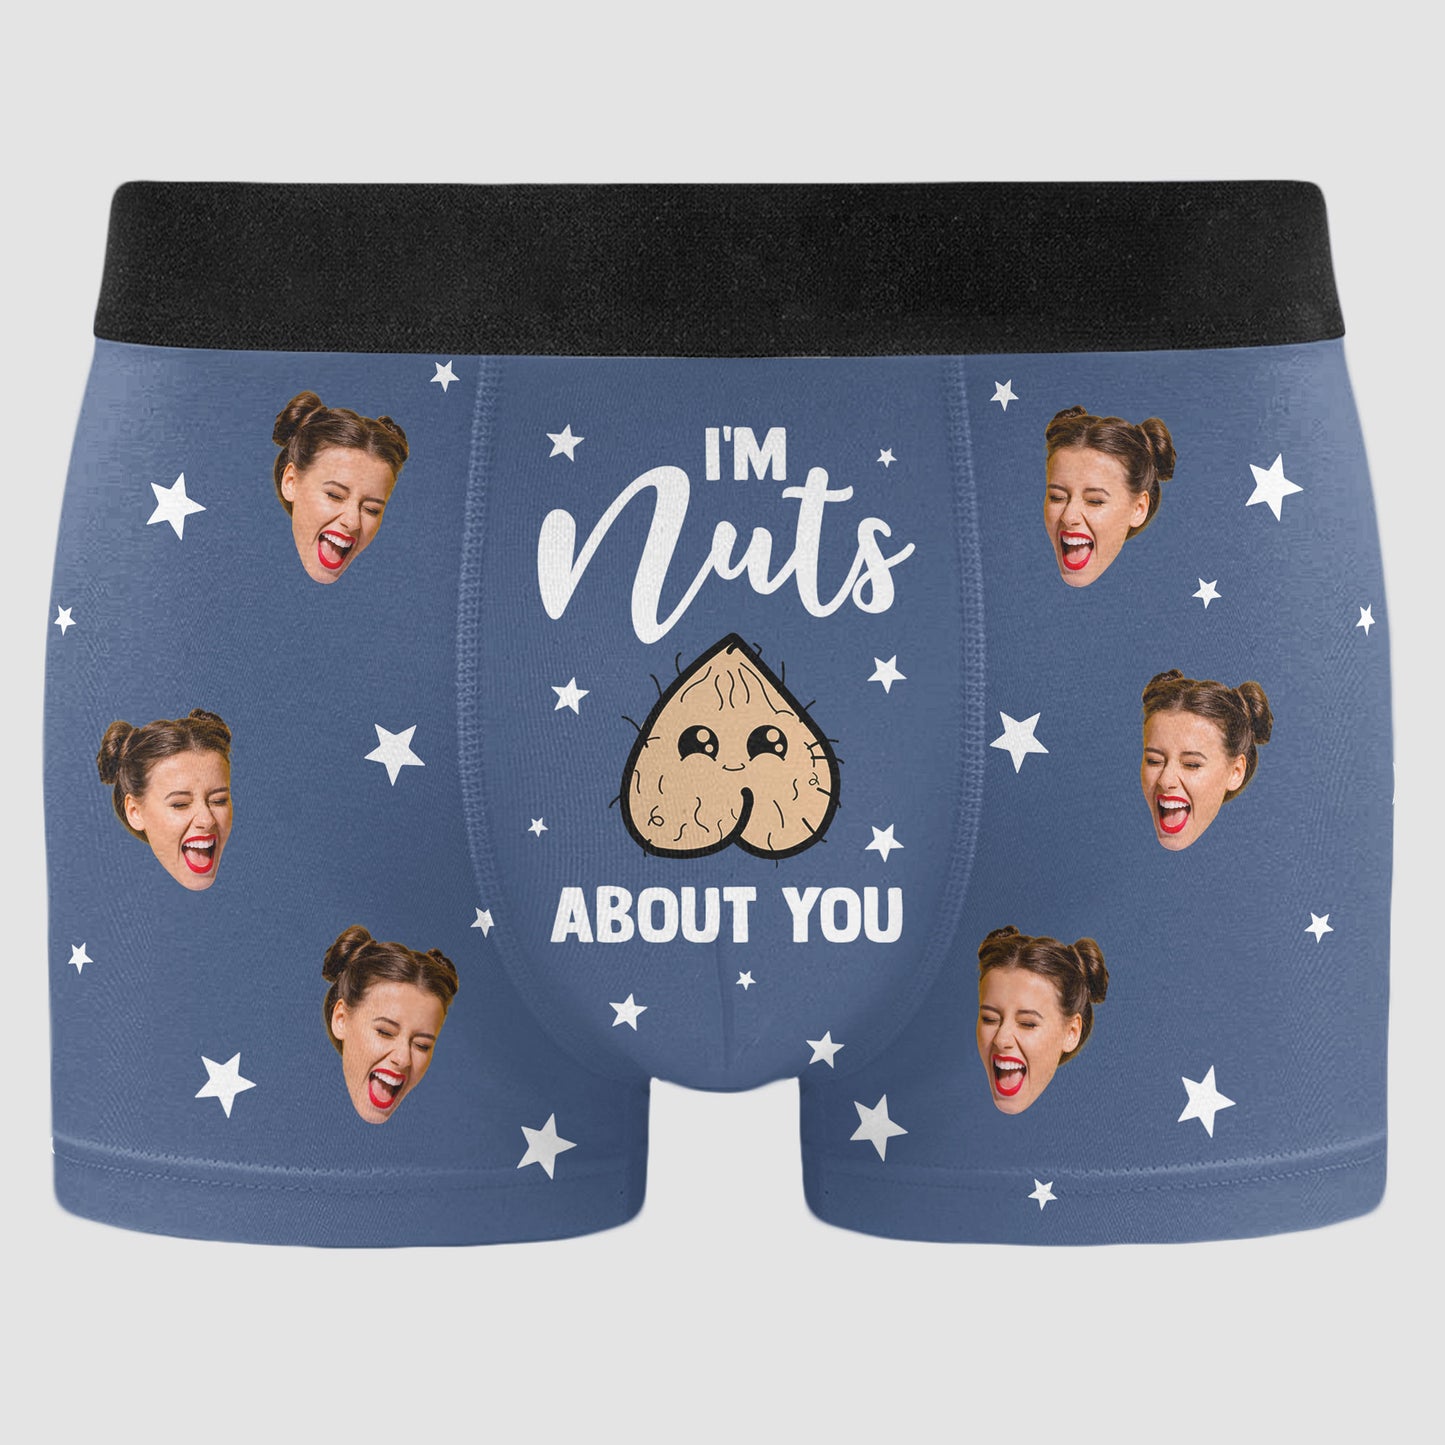 I'm Nut About You - Personalized Photo Men's Boxer Briefs